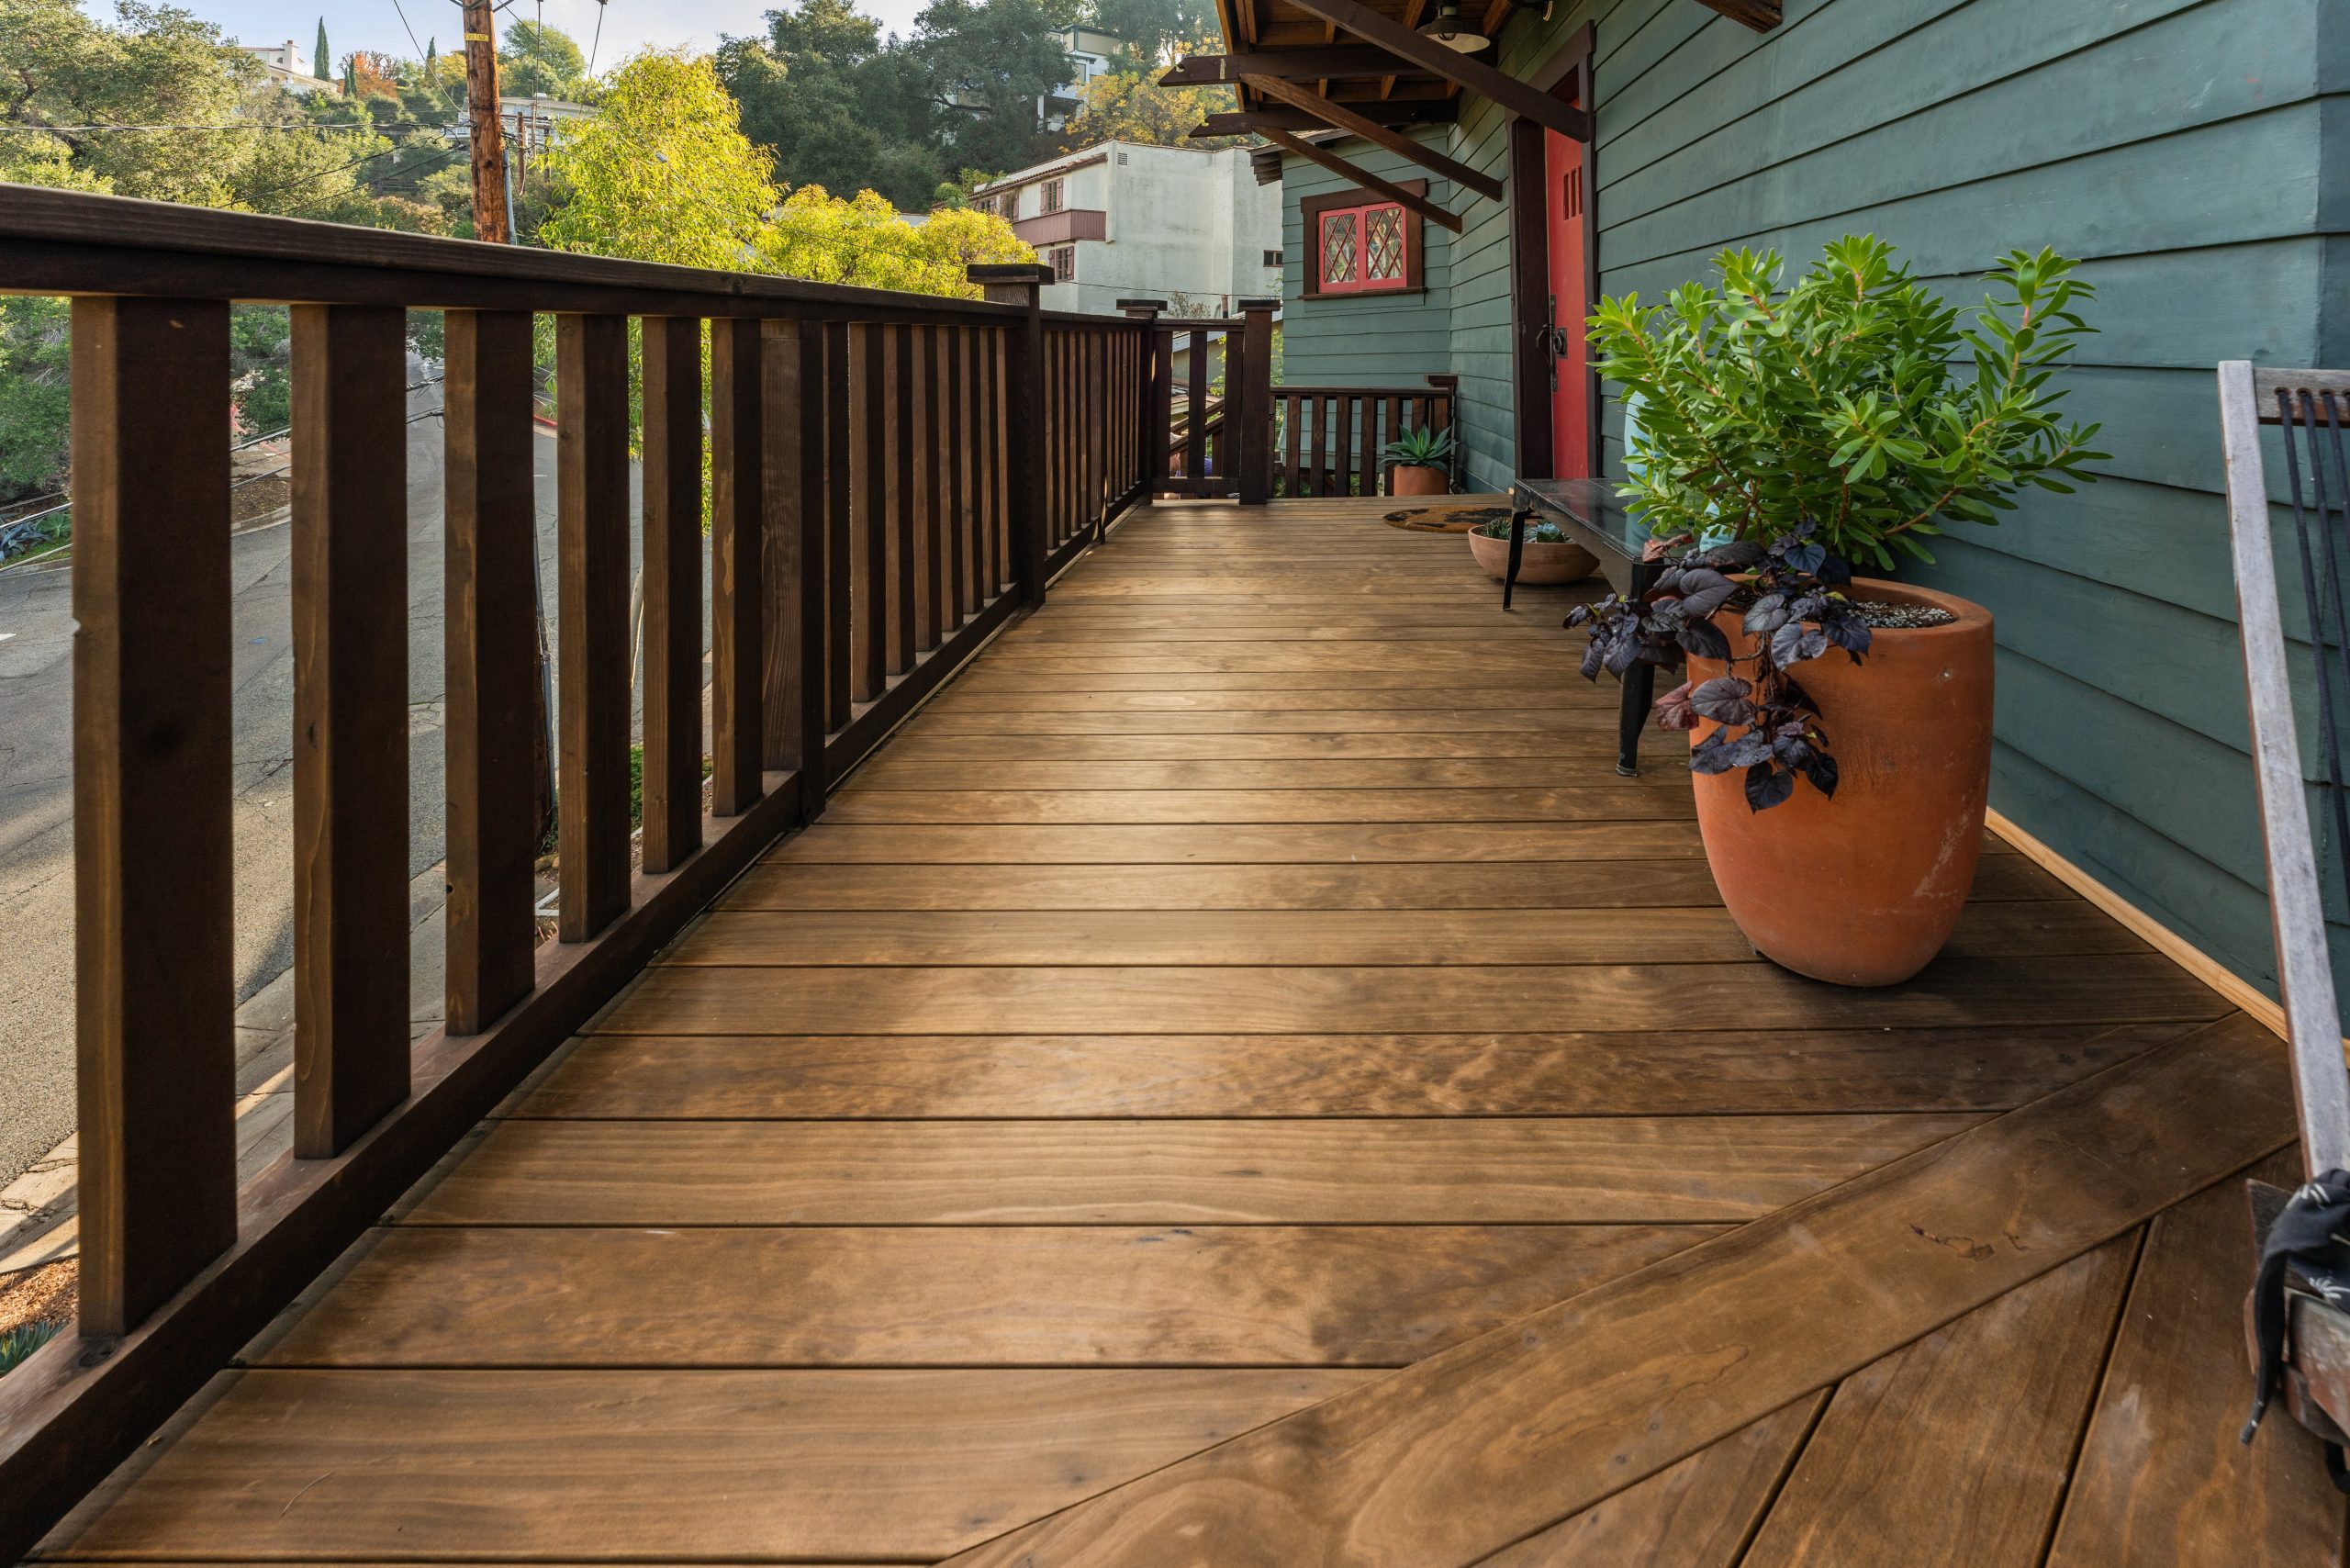 Kebony Modified Wood Deck Board was named the winner in the Outdoor Finishes and Surfaces category in due to its simple and fast installation